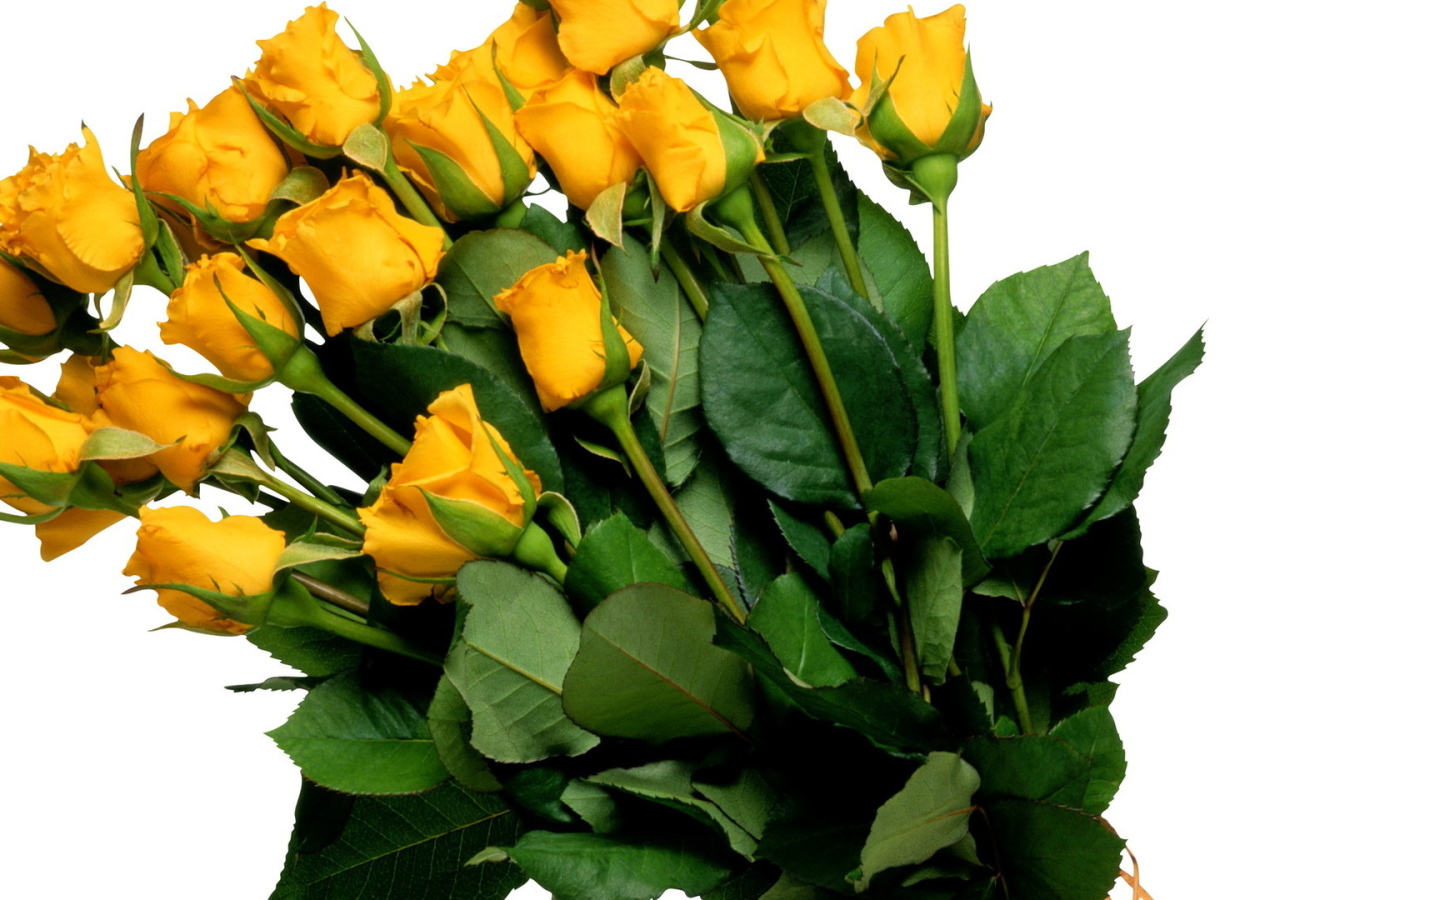 Yellow roses on a white background